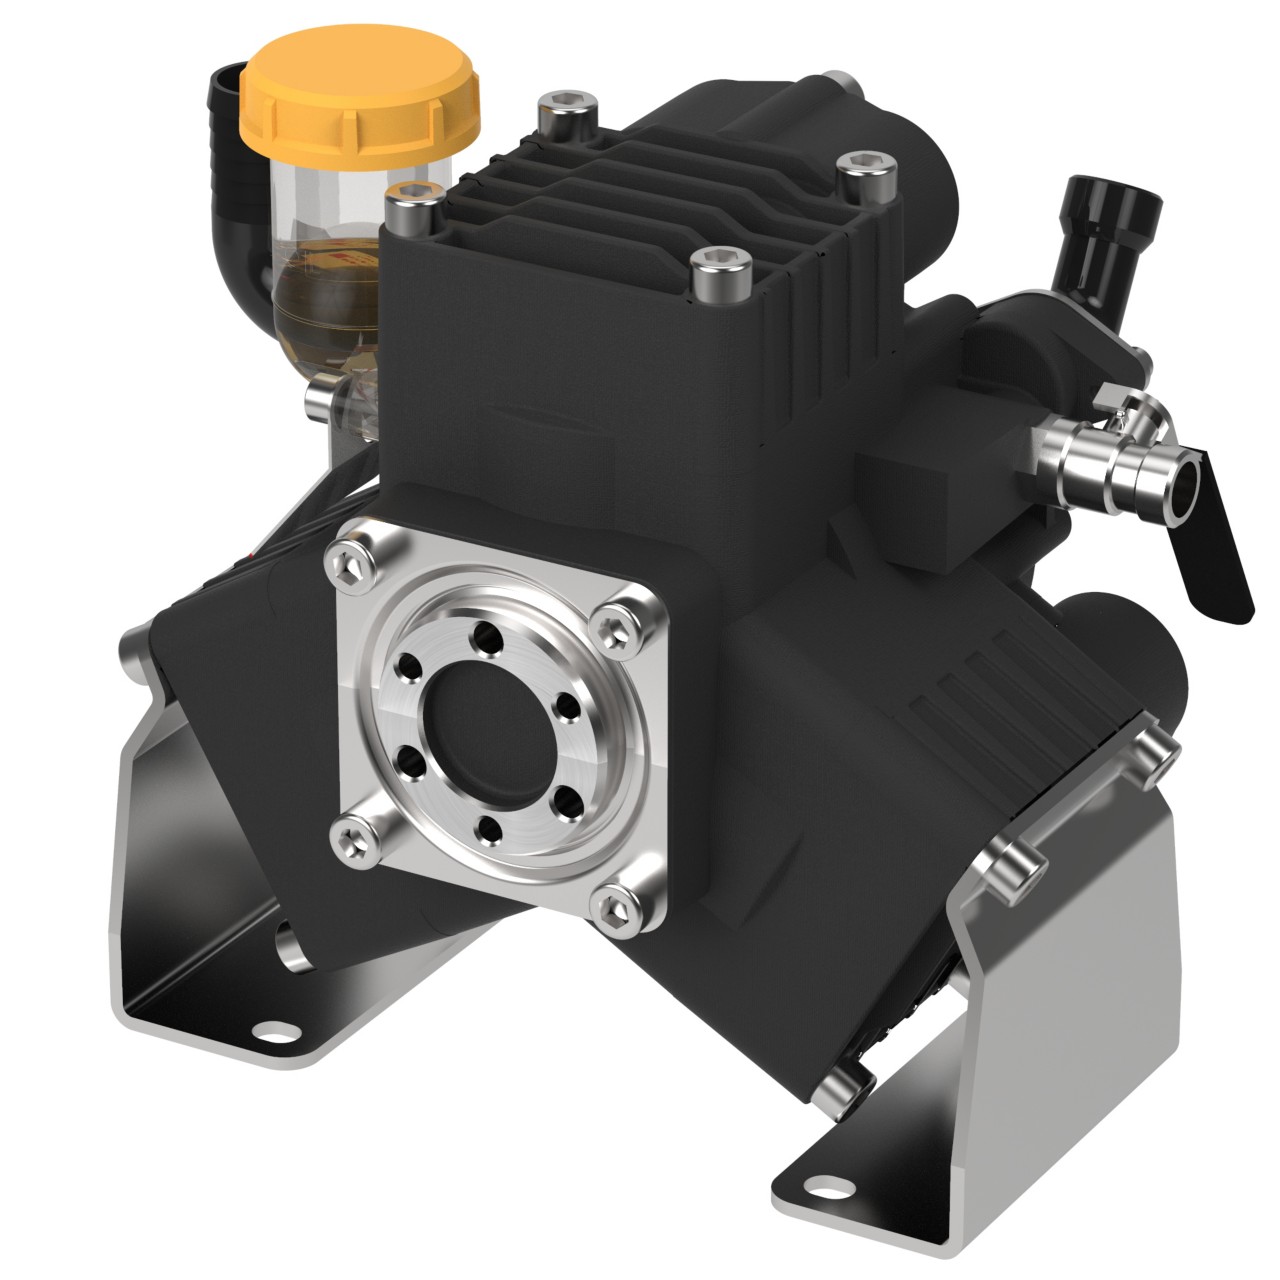 Picture of Diaphragm Pump ONLY, Medium Pressure, Poly Body, 13.5 GPM, 580 PSI, 550 RPM, No Shaft, 1-3/8" Inlet, 3/4" Outlet, 5.5 HP